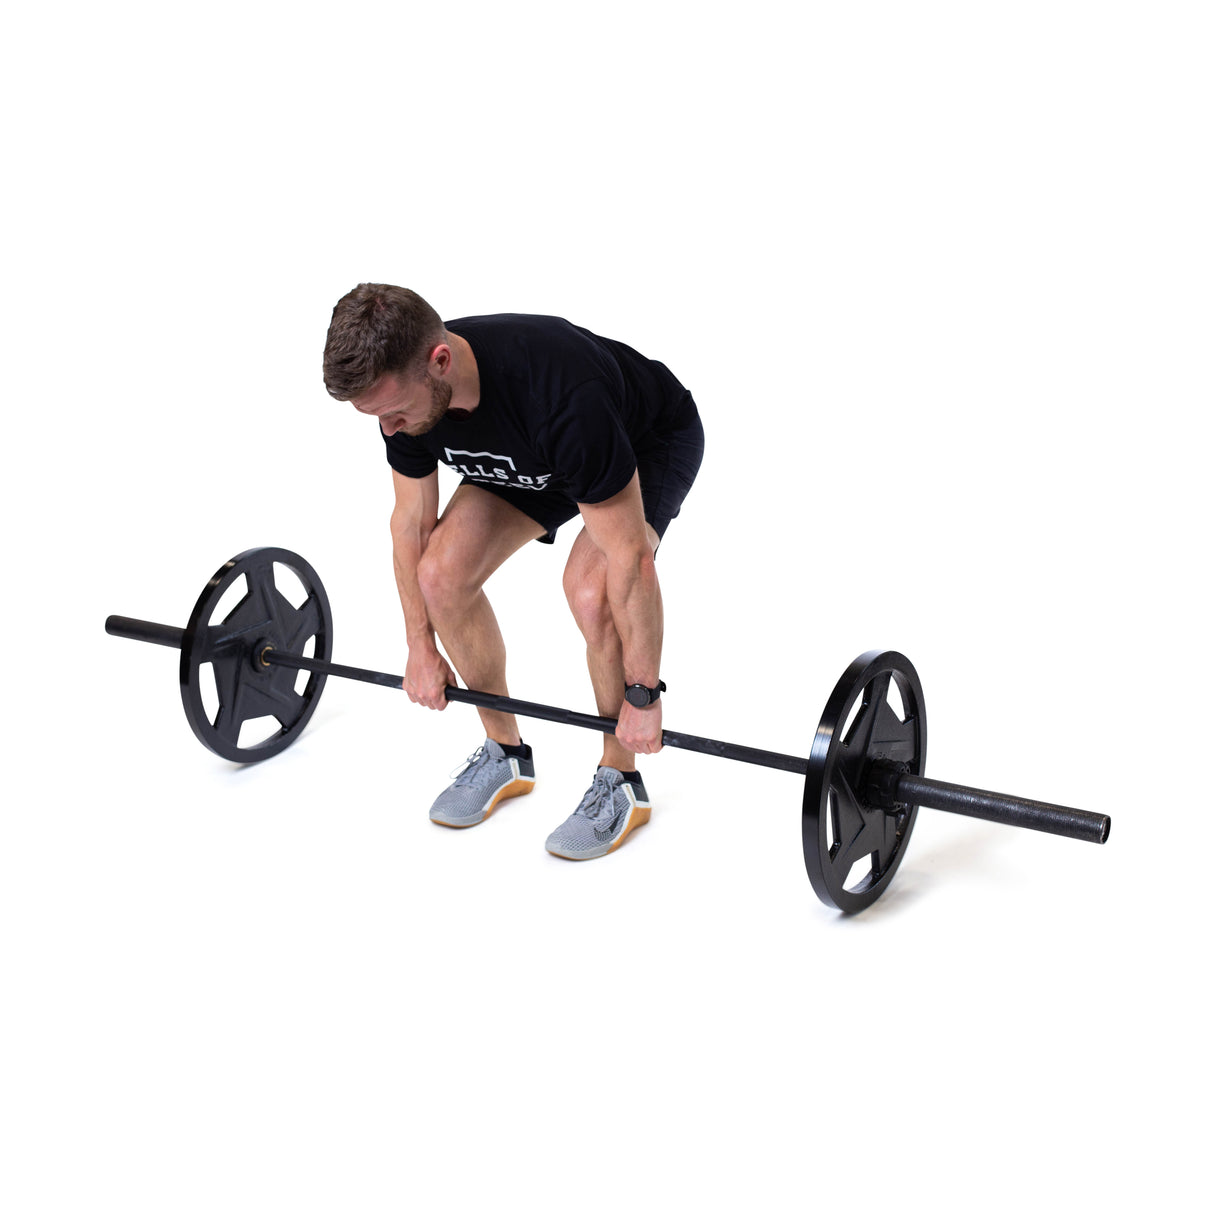 male athlete deadlifting using Black Mighty Grip Olympic Weight Plates